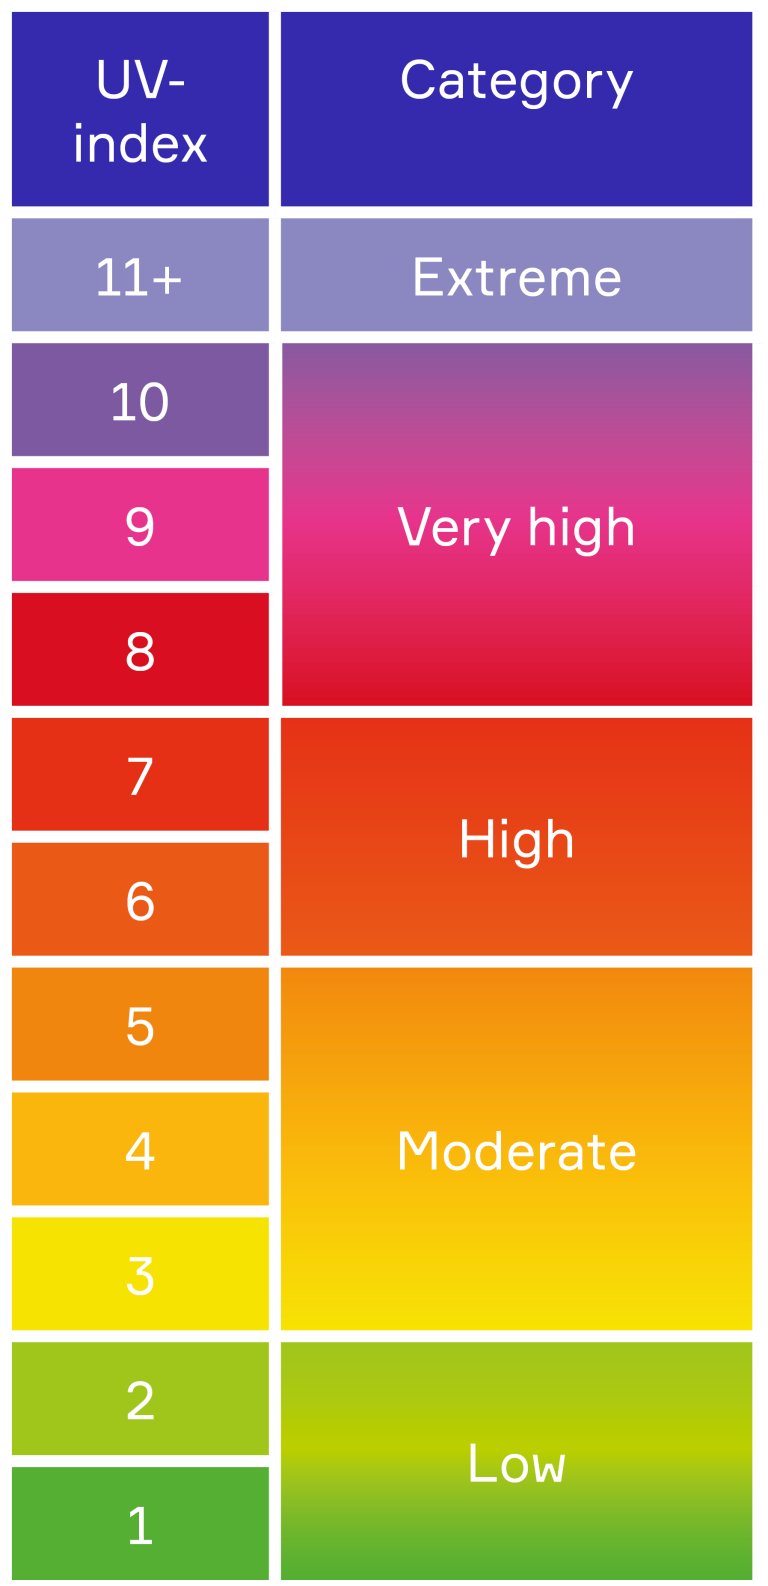 UV index describes the level of the UV radiation from the sun. The scale goes from 1 to 11+, where 1 on the scale means low and 11 or higher means extremely intense sun.